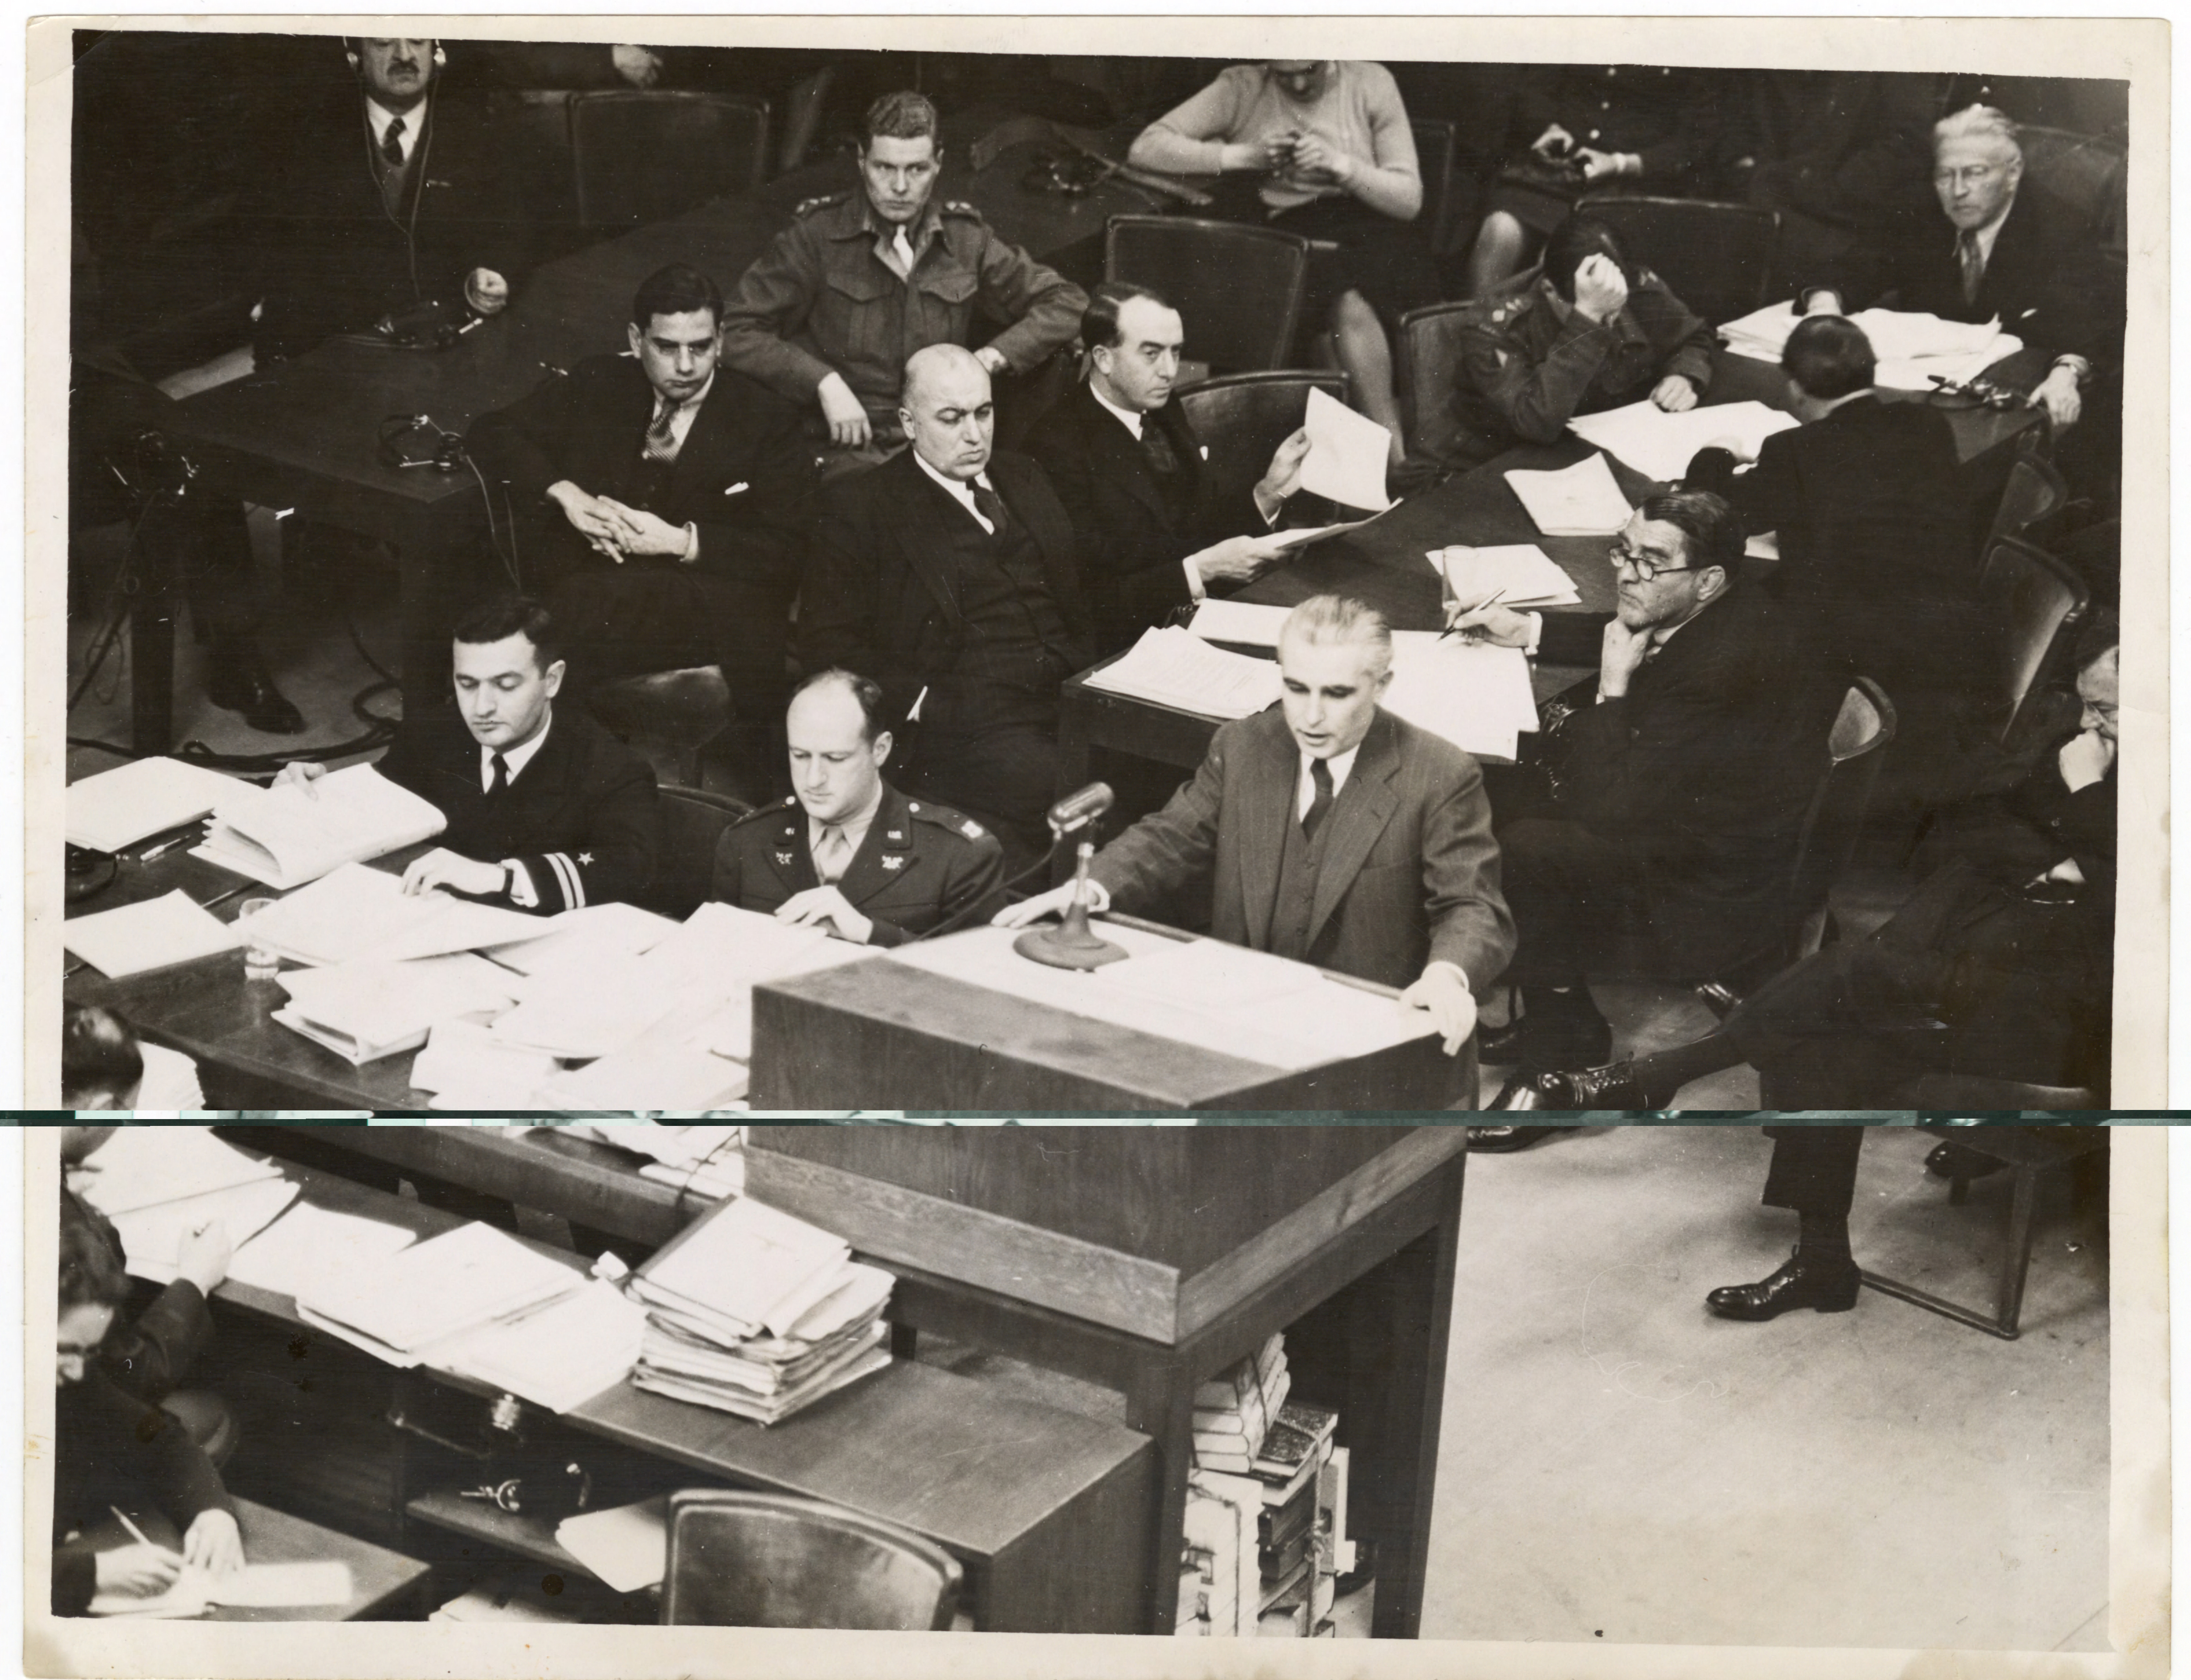 Thomas J. Dodd addressing the International Military Tribunal in Nuremberg. (Thomas J. Dodd Papers, Archives & Special Collections at the Thomas J. Dodd Research Center, University of Connecticut Libraries)